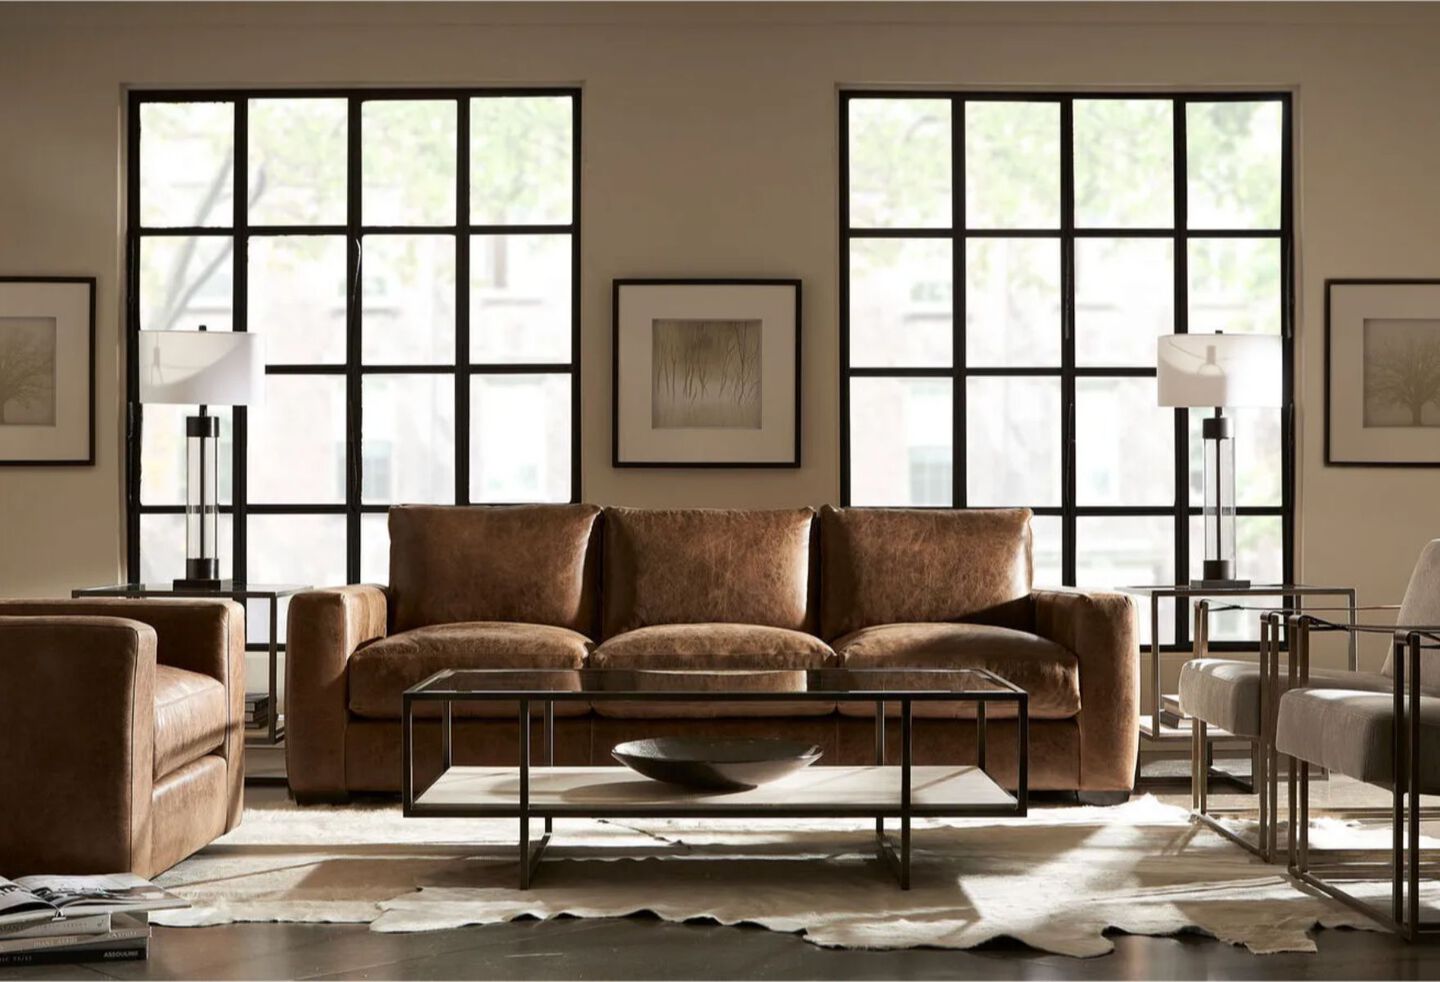 Living room with brown leather couch and recliner, two light grey chairs, and a black metal coffee table 